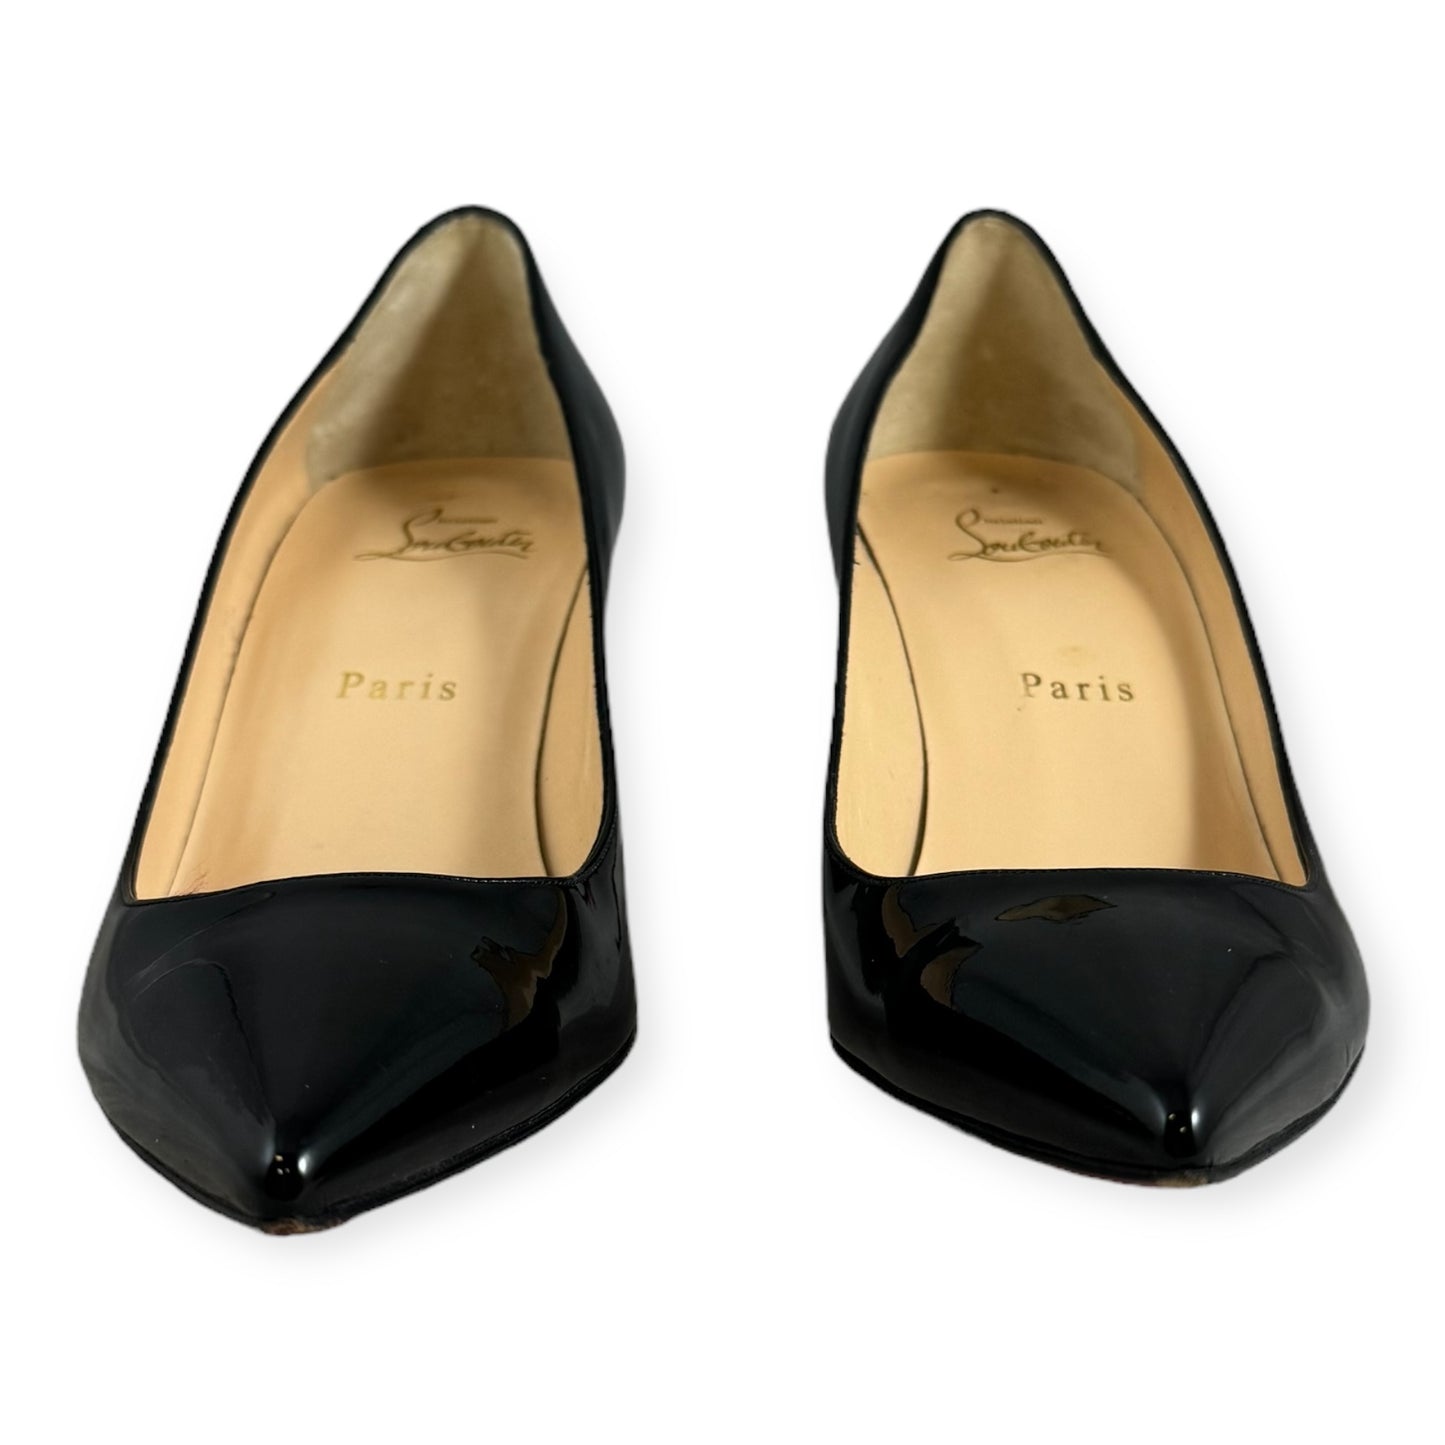 CHRISTIAN LOUBOUTIN Patent Midheel Pumps in Black | Size 38.5